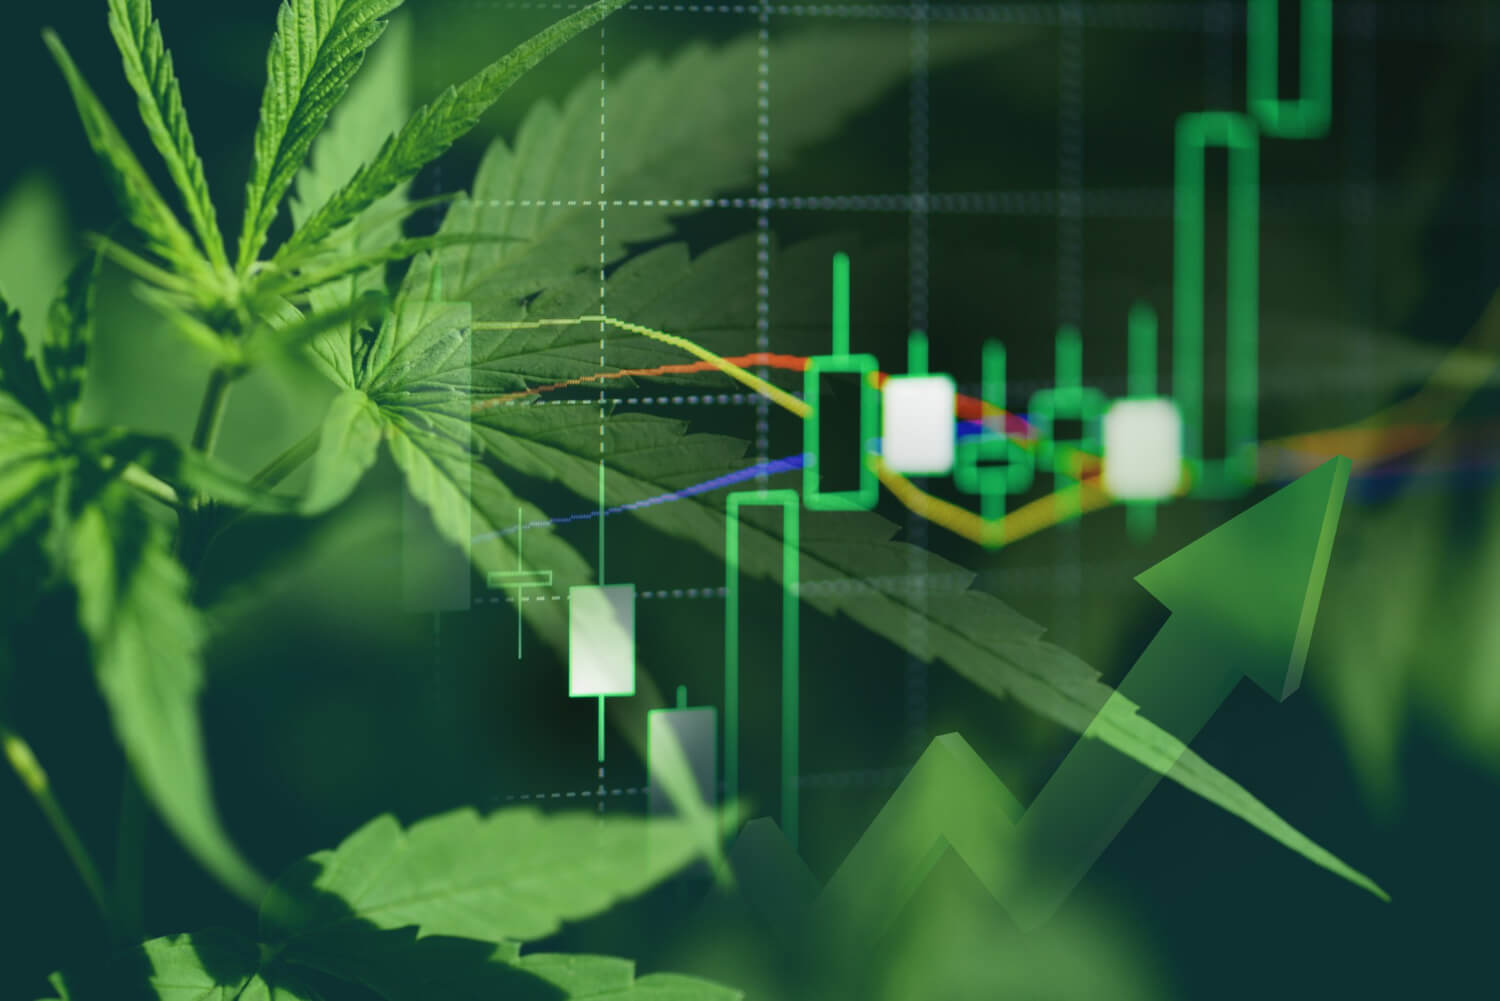 Leafly Holdings has recently consolidated its shares to maintain its Nasdaq listing